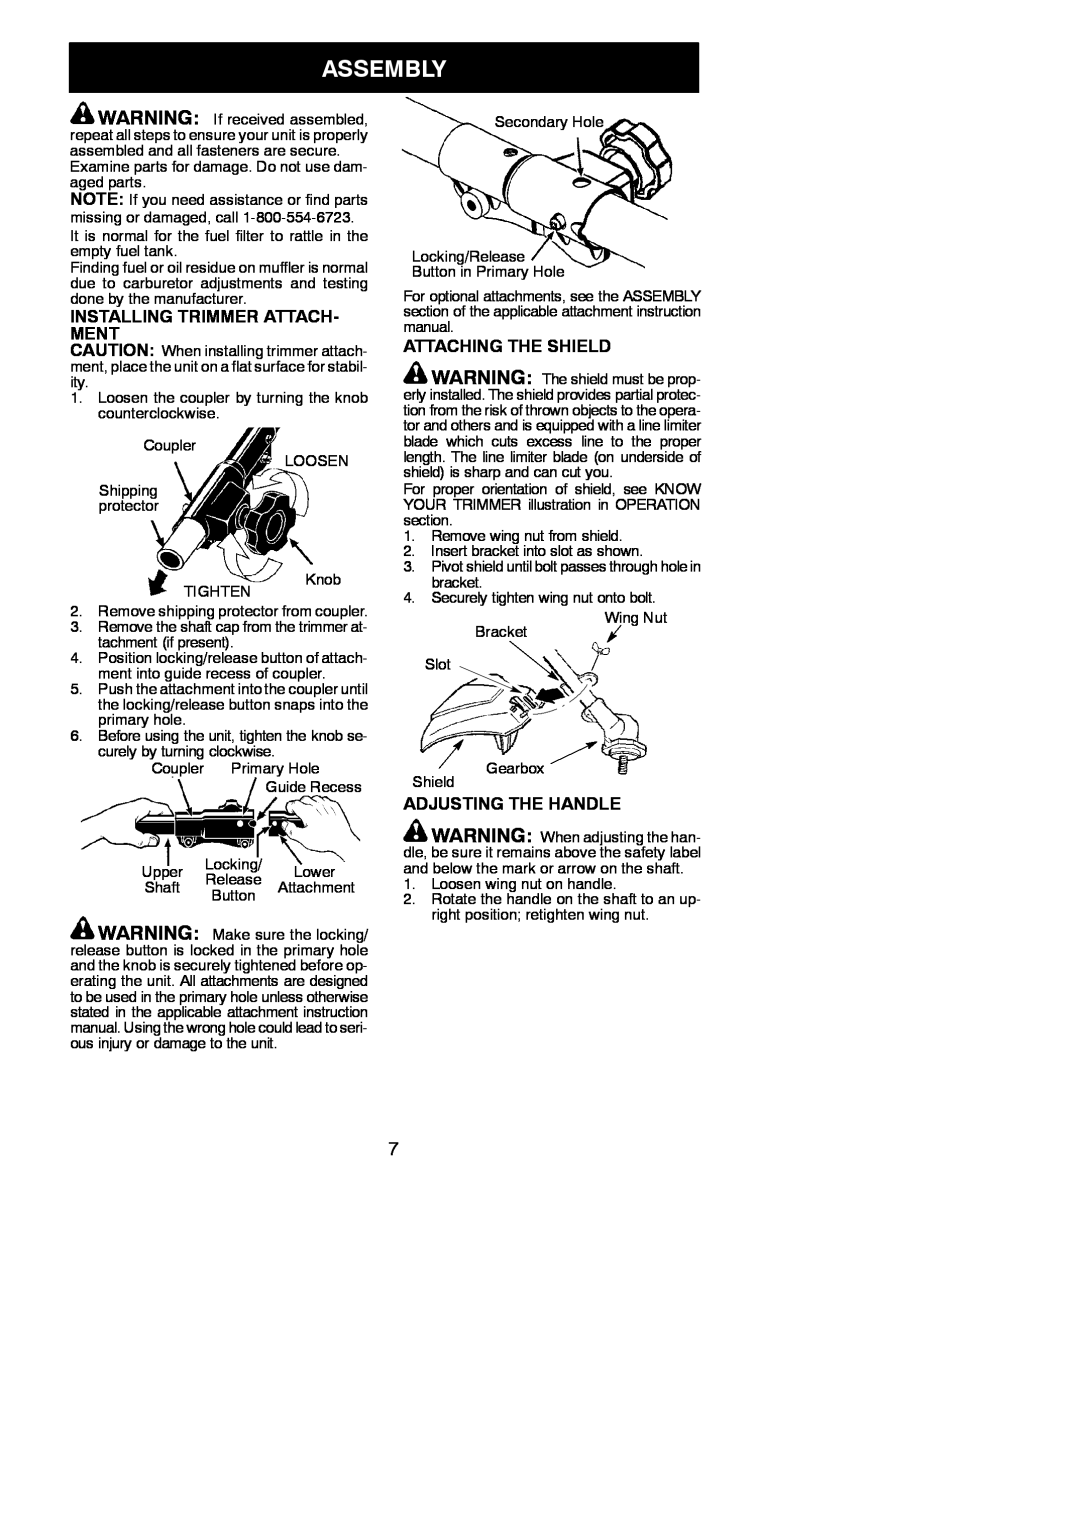 Poulan 545137291 instruction manual Assembly, Installing Trimmer Attach- Ment, Attaching The Shield, Adjusting The Handle 